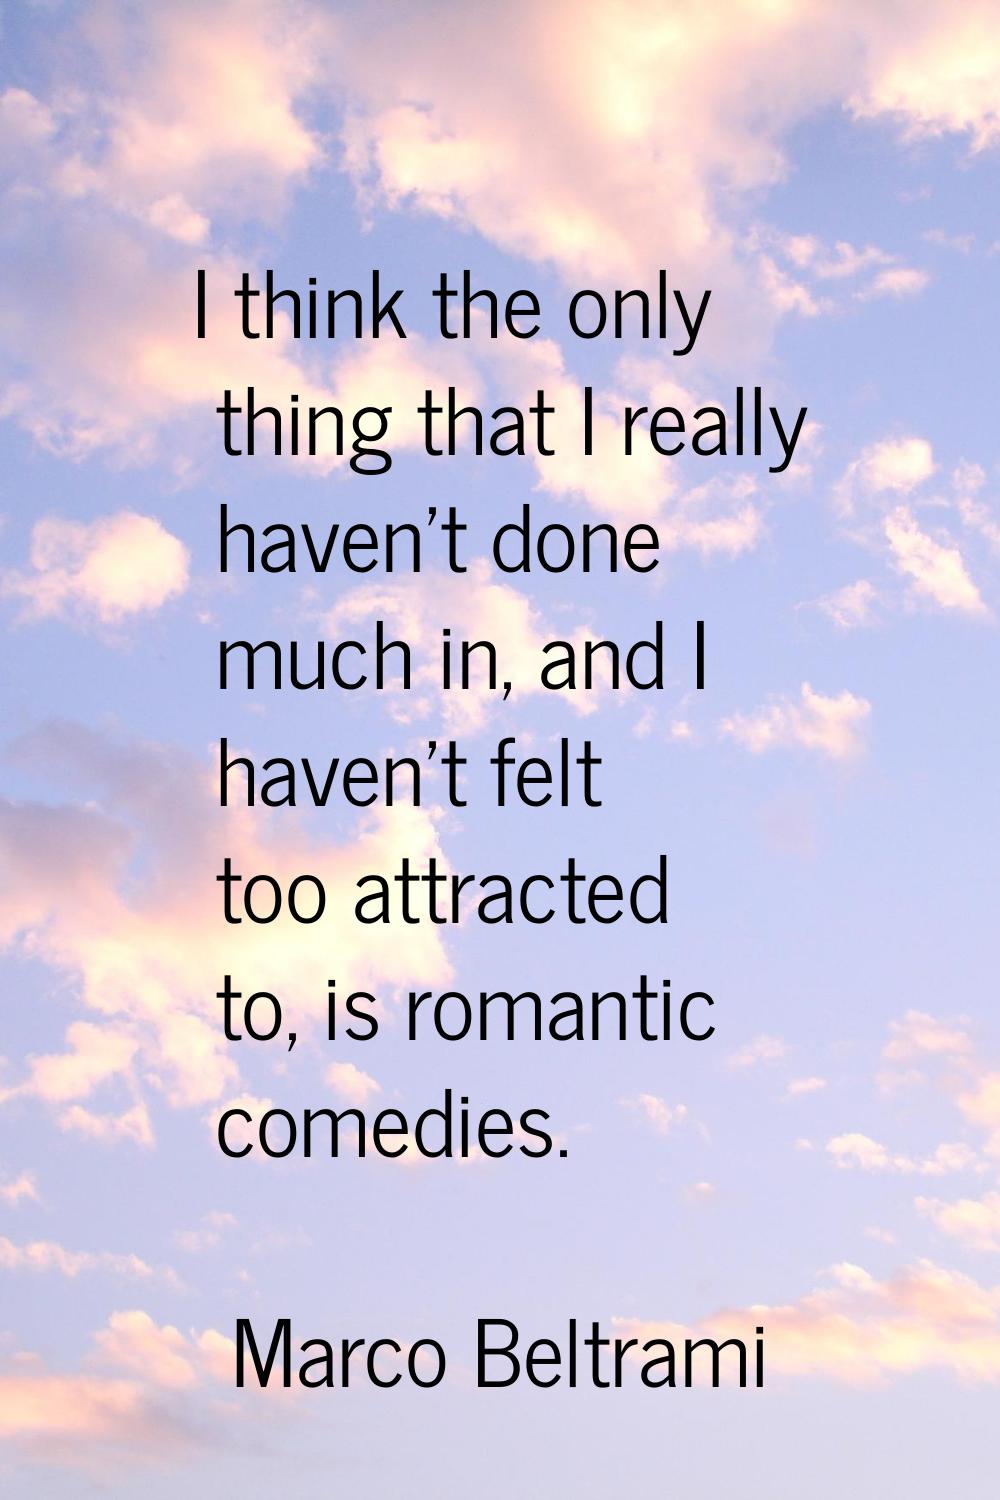 I think the only thing that I really haven't done much in, and I haven't felt too attracted to, is 